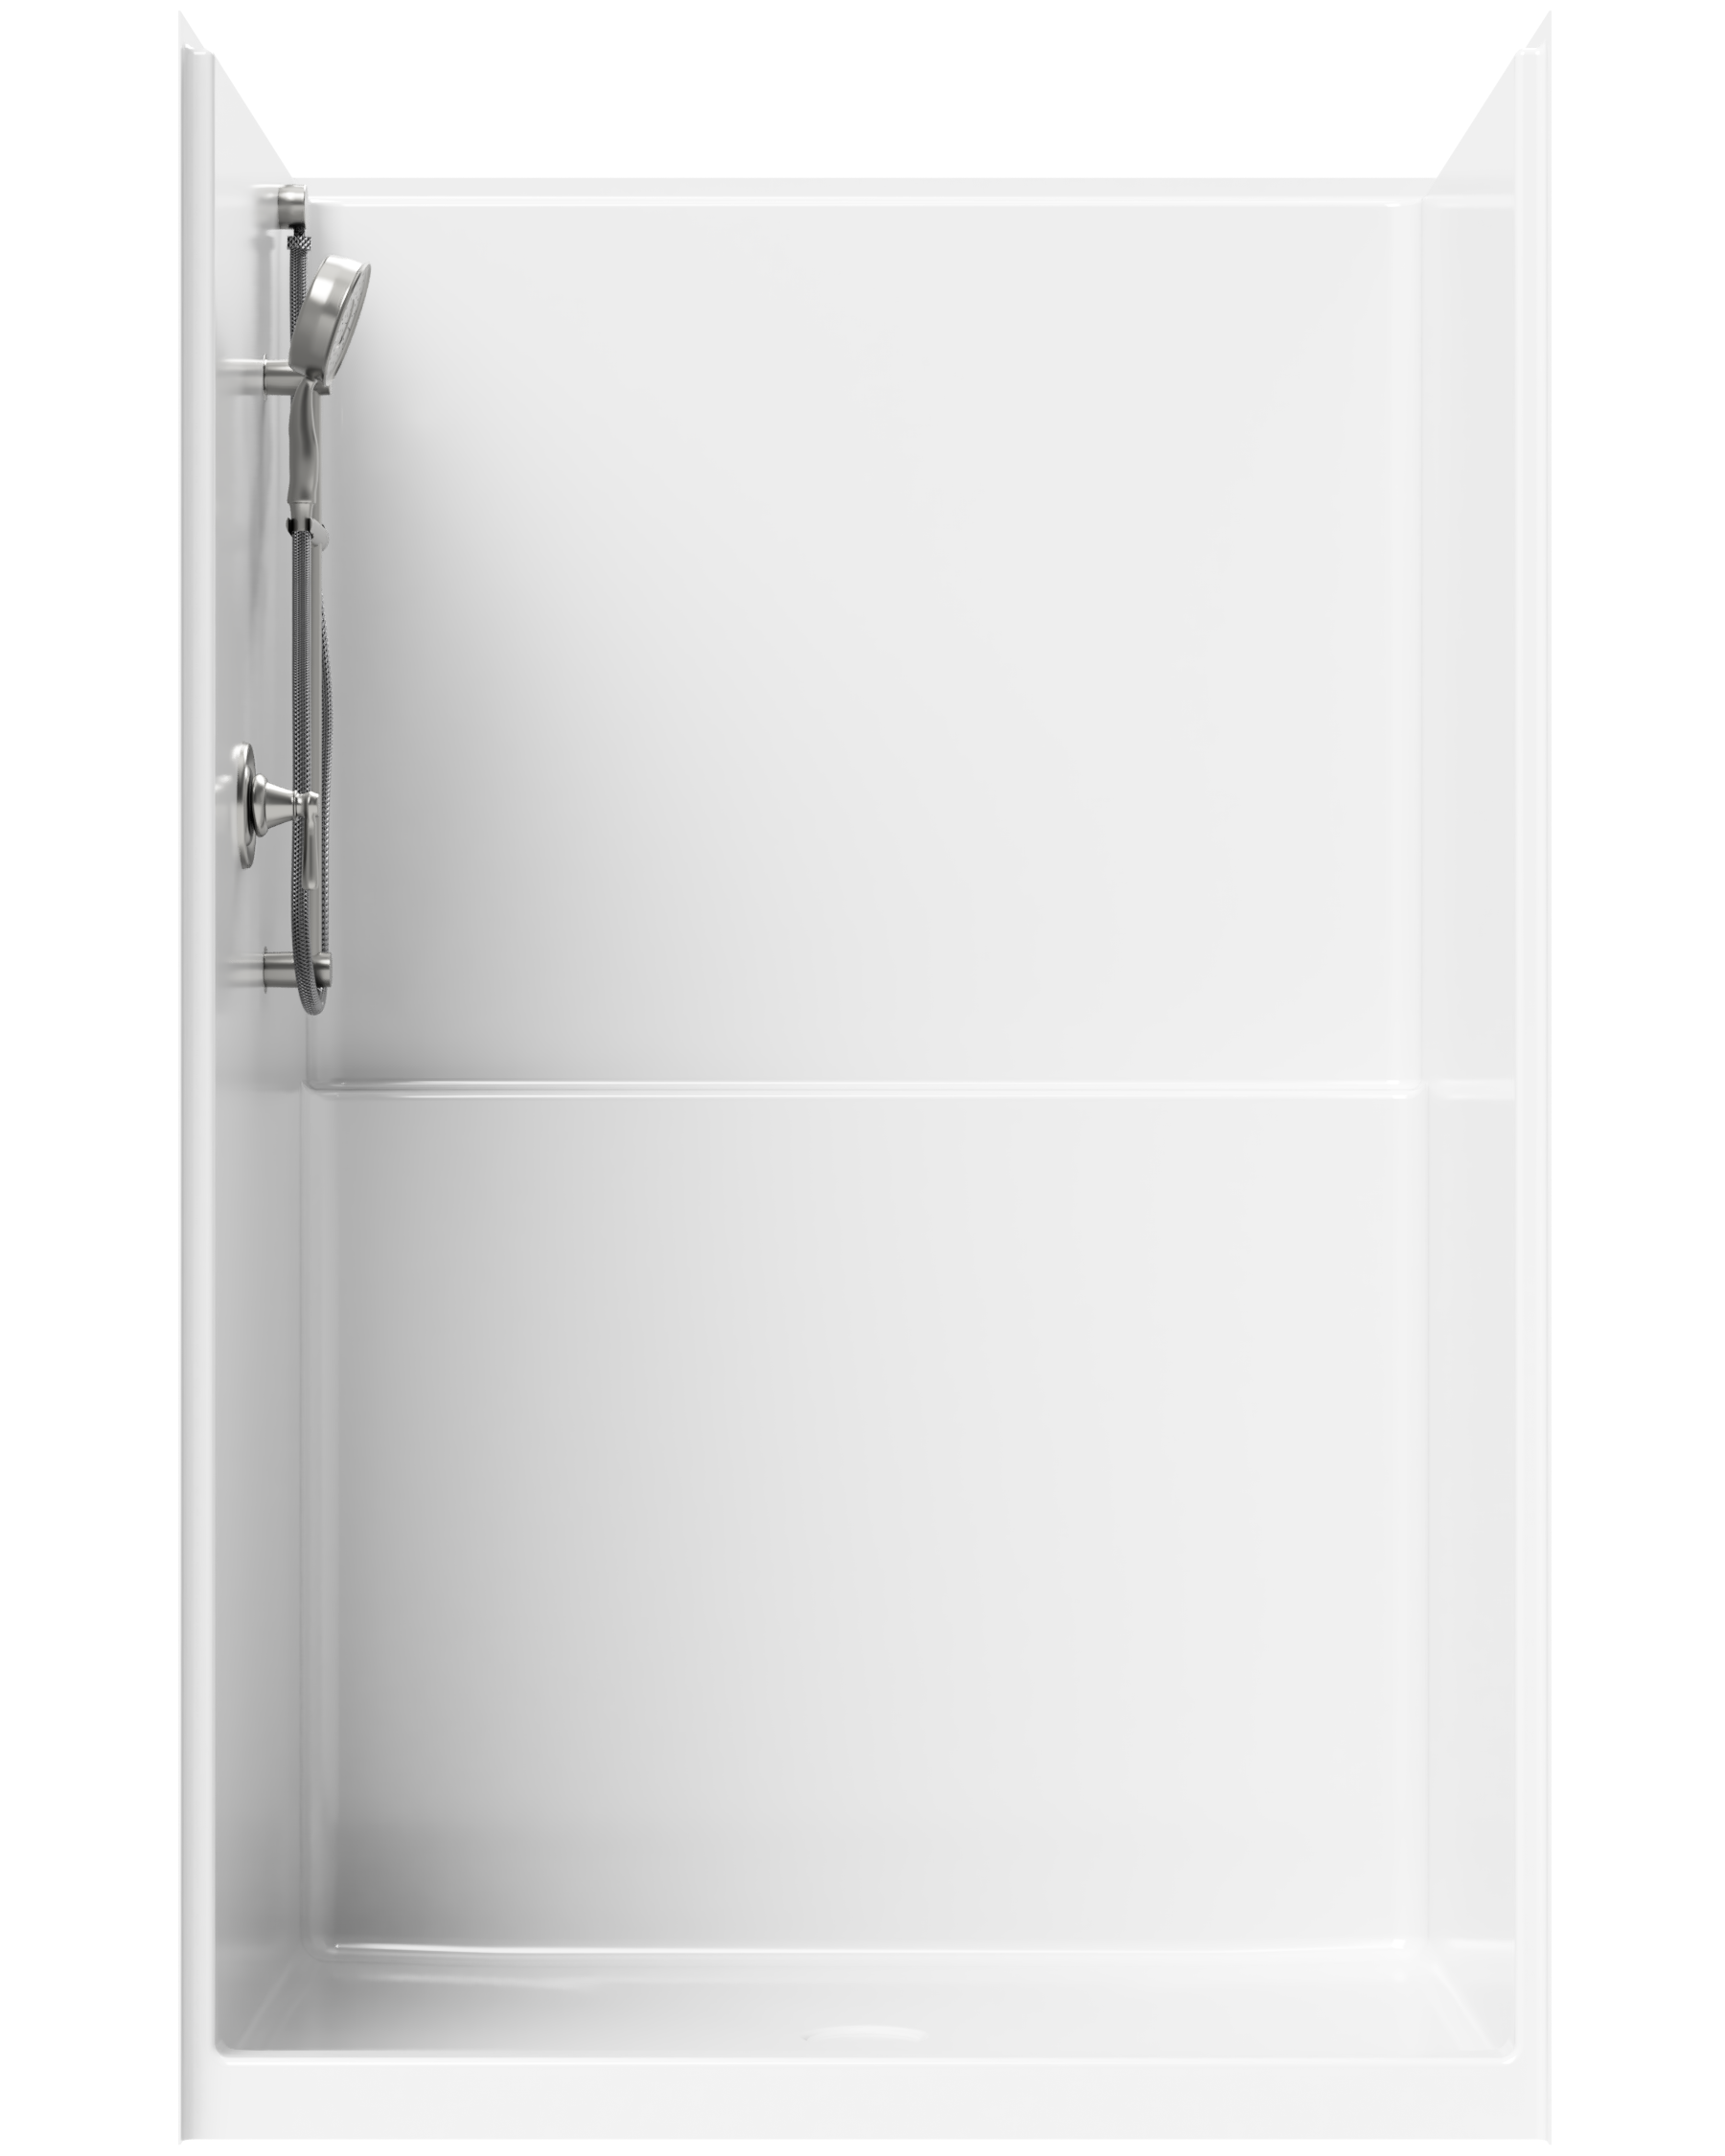 4' Shower with Soap Ledge